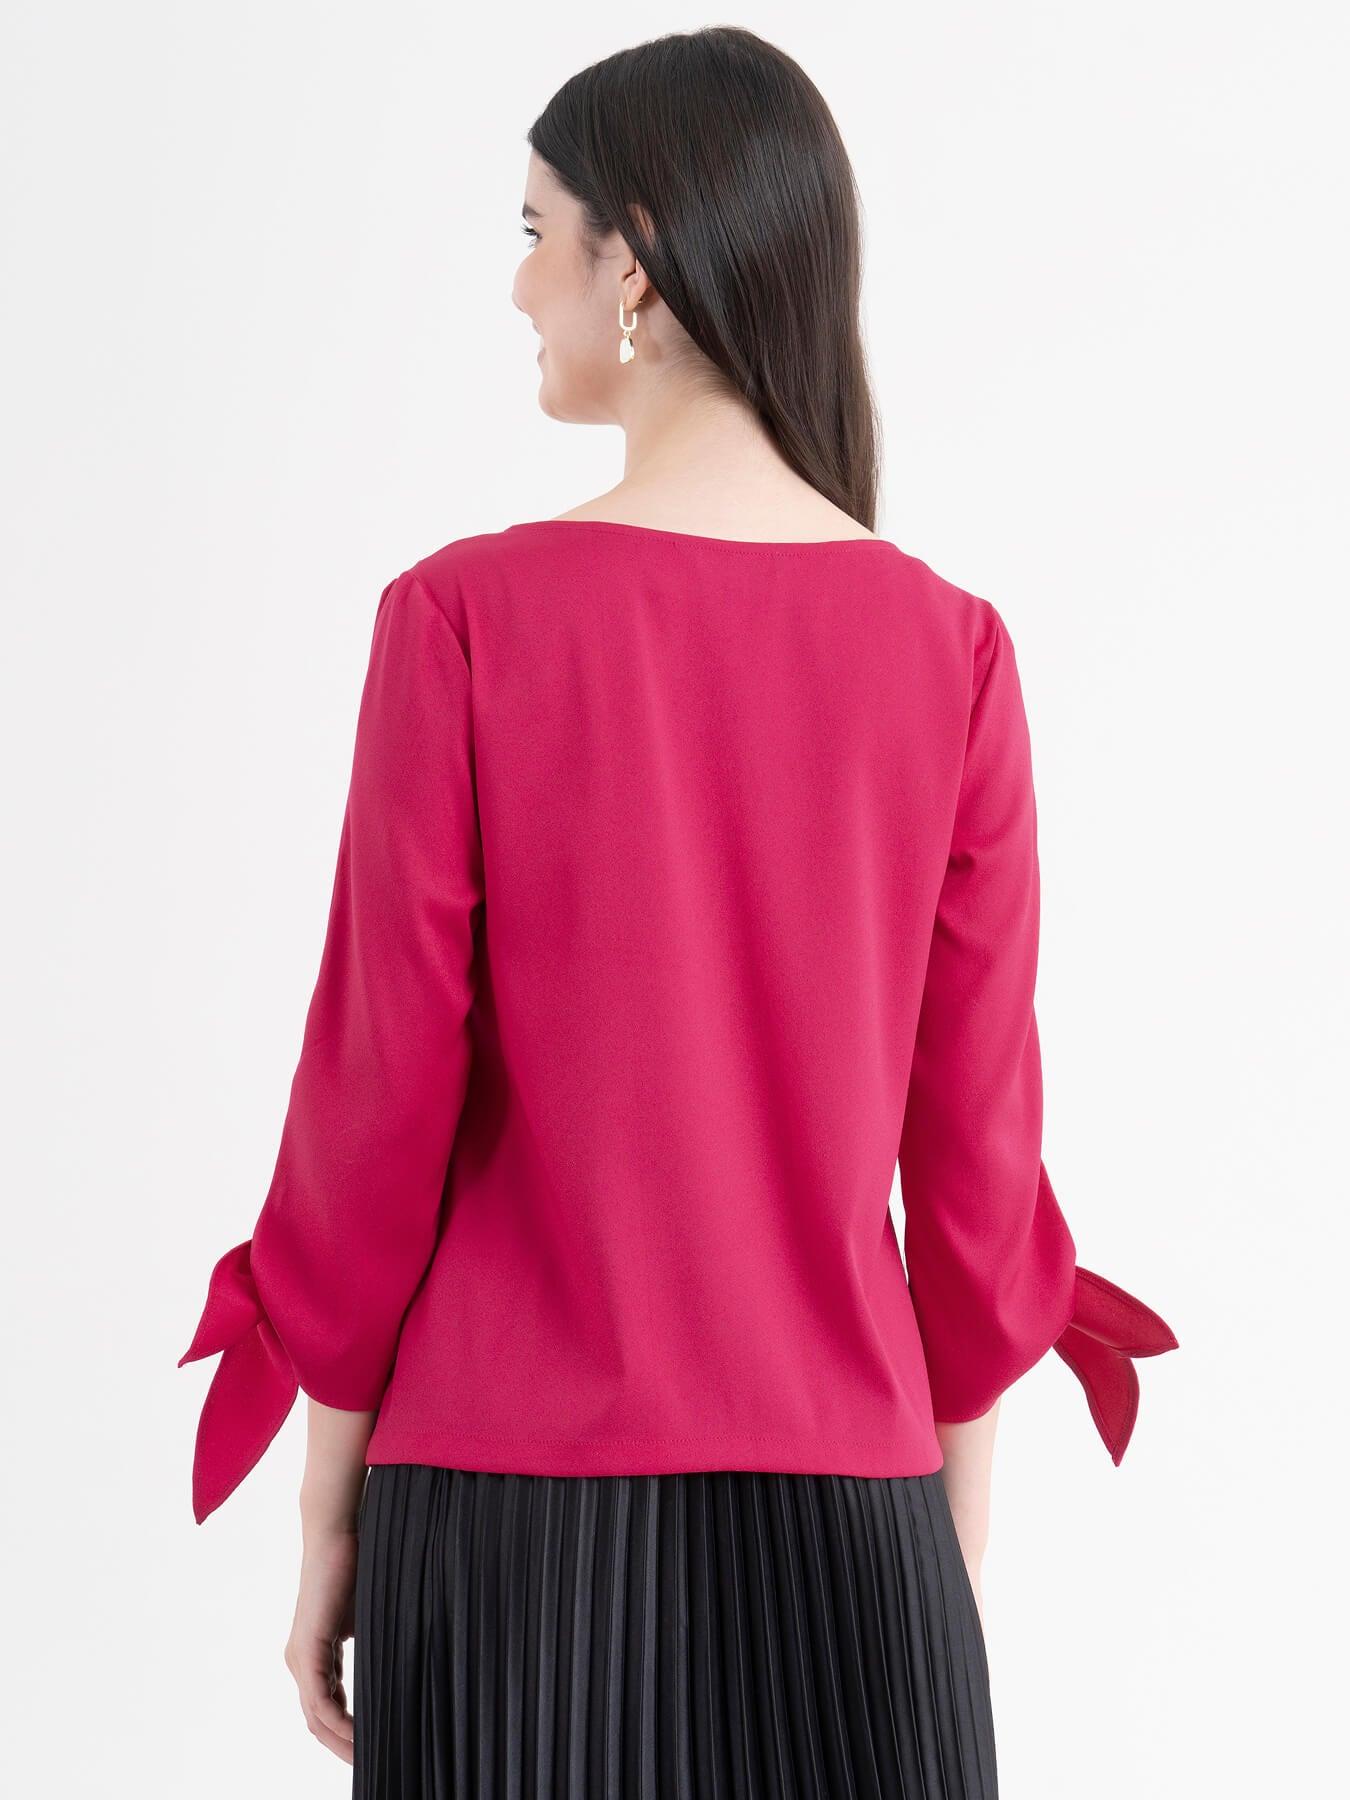 Boat Neck Tie Up Sleeve Top - Fuchsia| Formal Tops